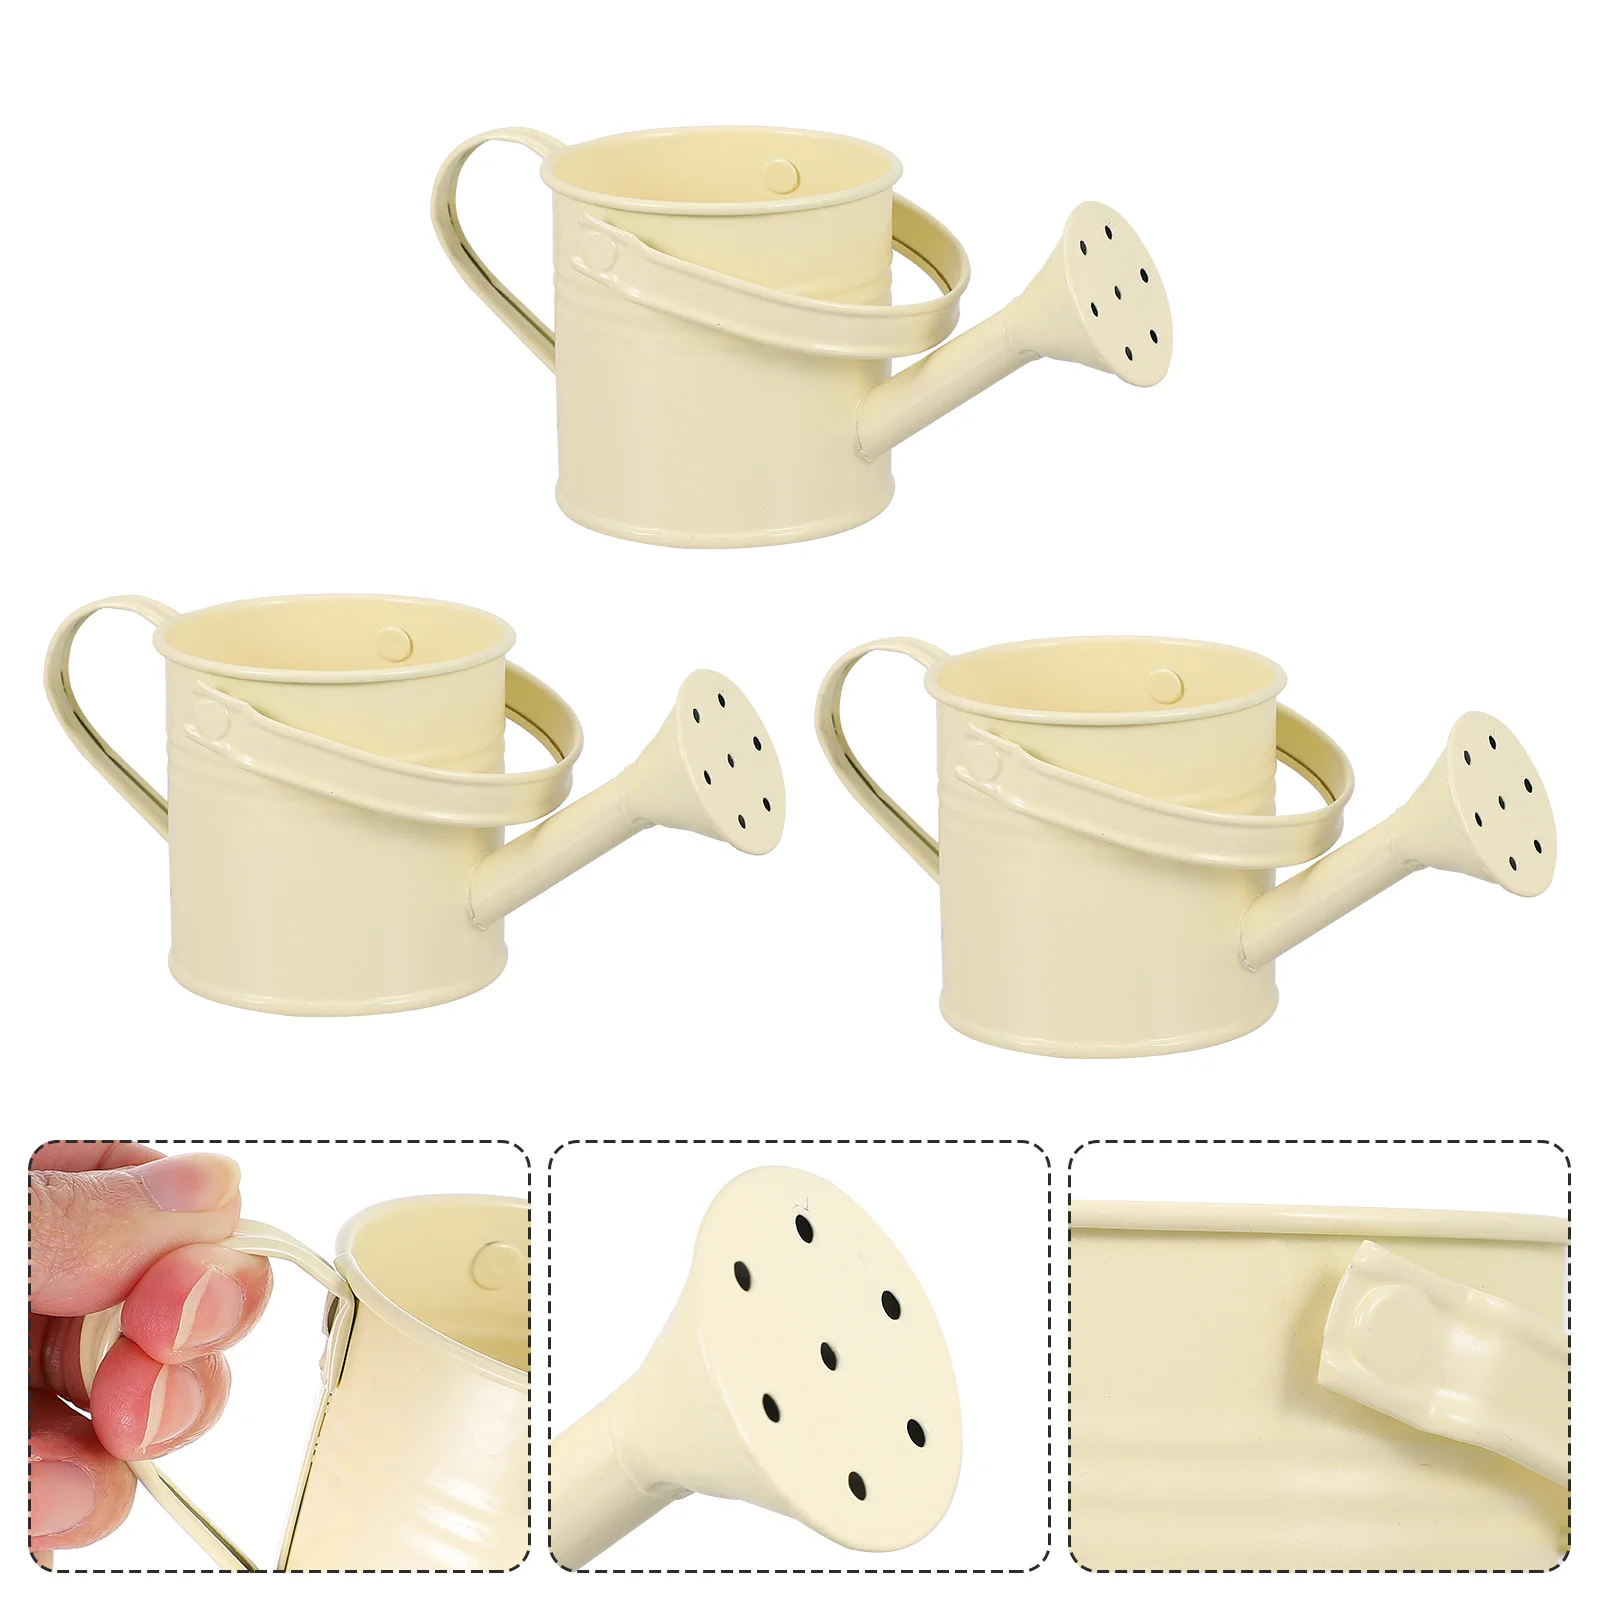 

5 Pcs Tin Watering Can Mini Kettle Gardening Irrigation Tool Bucket Iron Refillable Horticulture Sprinkling Child Pot